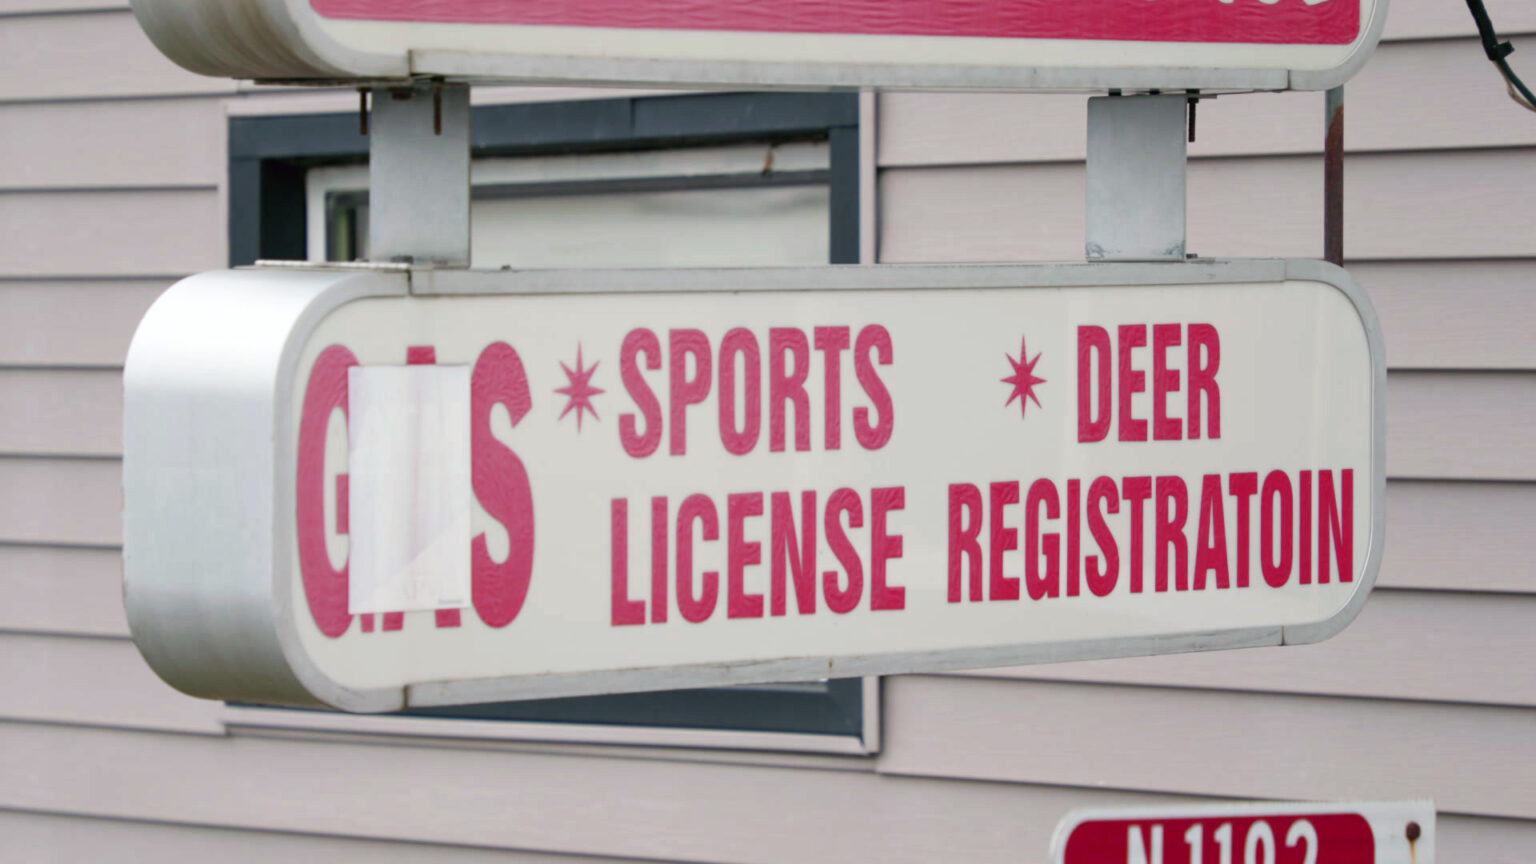 A sign with internal illumination that is not activated and the words Gas, which is covered in part by tape, as well as Sports License and Deer Registration, is mounted to the the exterior wall of a building with horizontal siding.